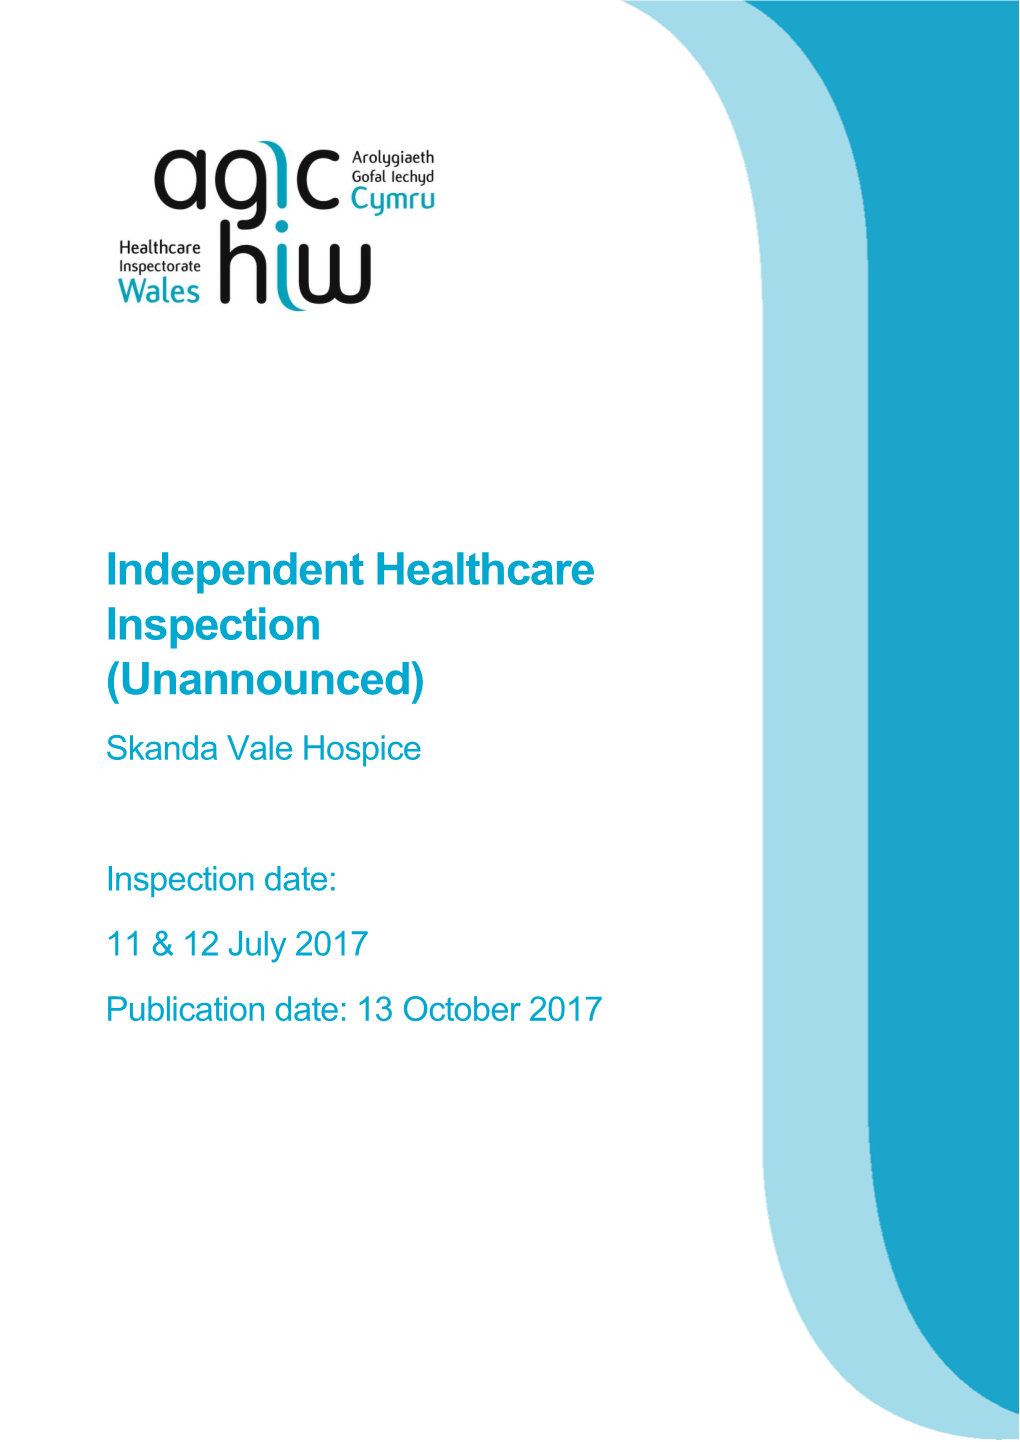 Independent Healthcare Inspection (Unannounced) Skanda Vale Hospice